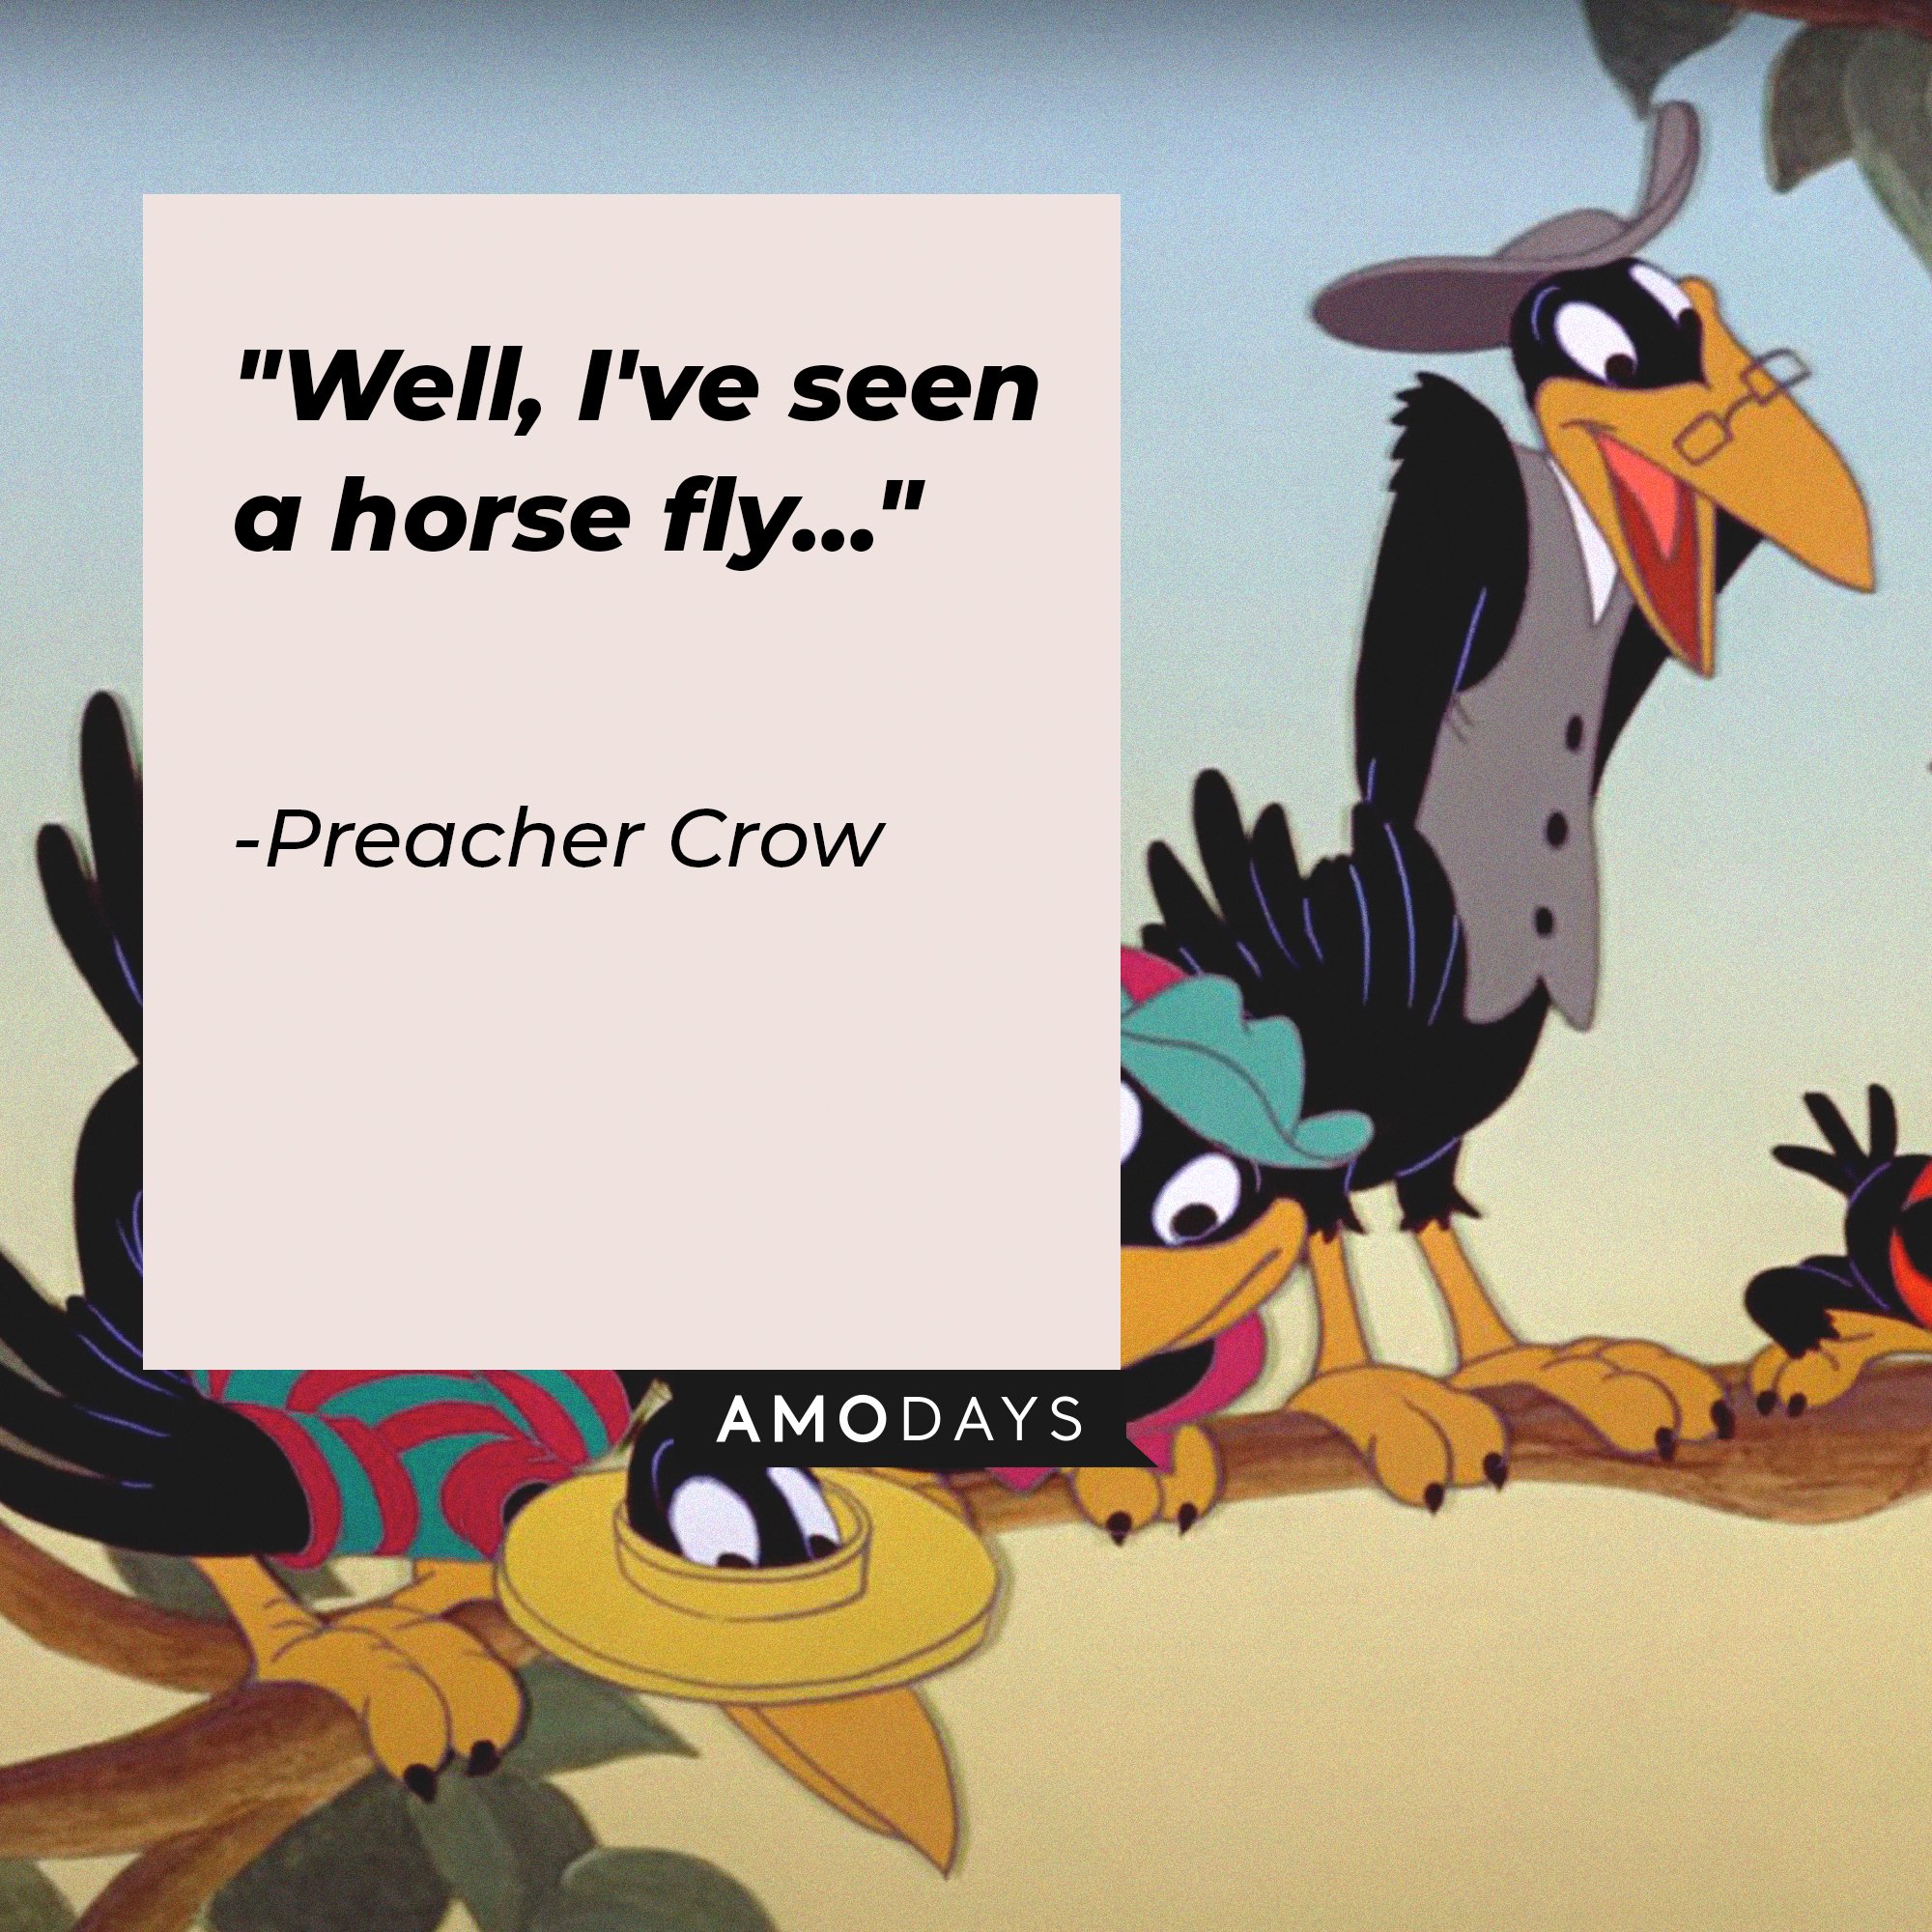 Preacher Crow’s quote: "Well, I've seen a horse fly…"  | Image: AmoDays   